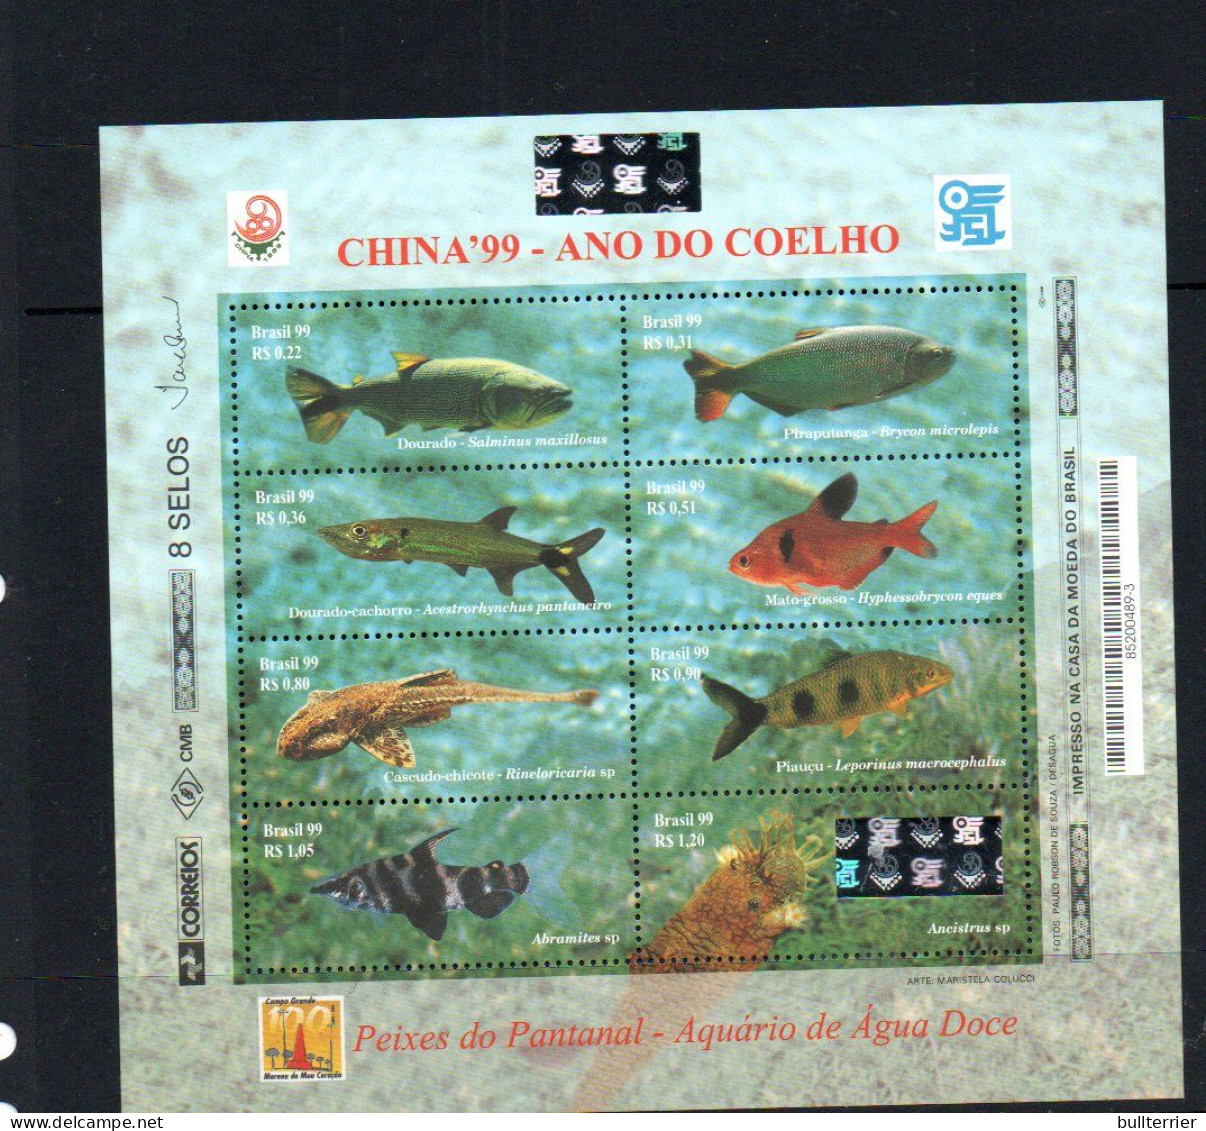 HOLOGRAMS - BRAZIL - 1999- CHINA EXPO FISHES SHEETLET OF 8 MINT NEVER HINGED - Hologramme